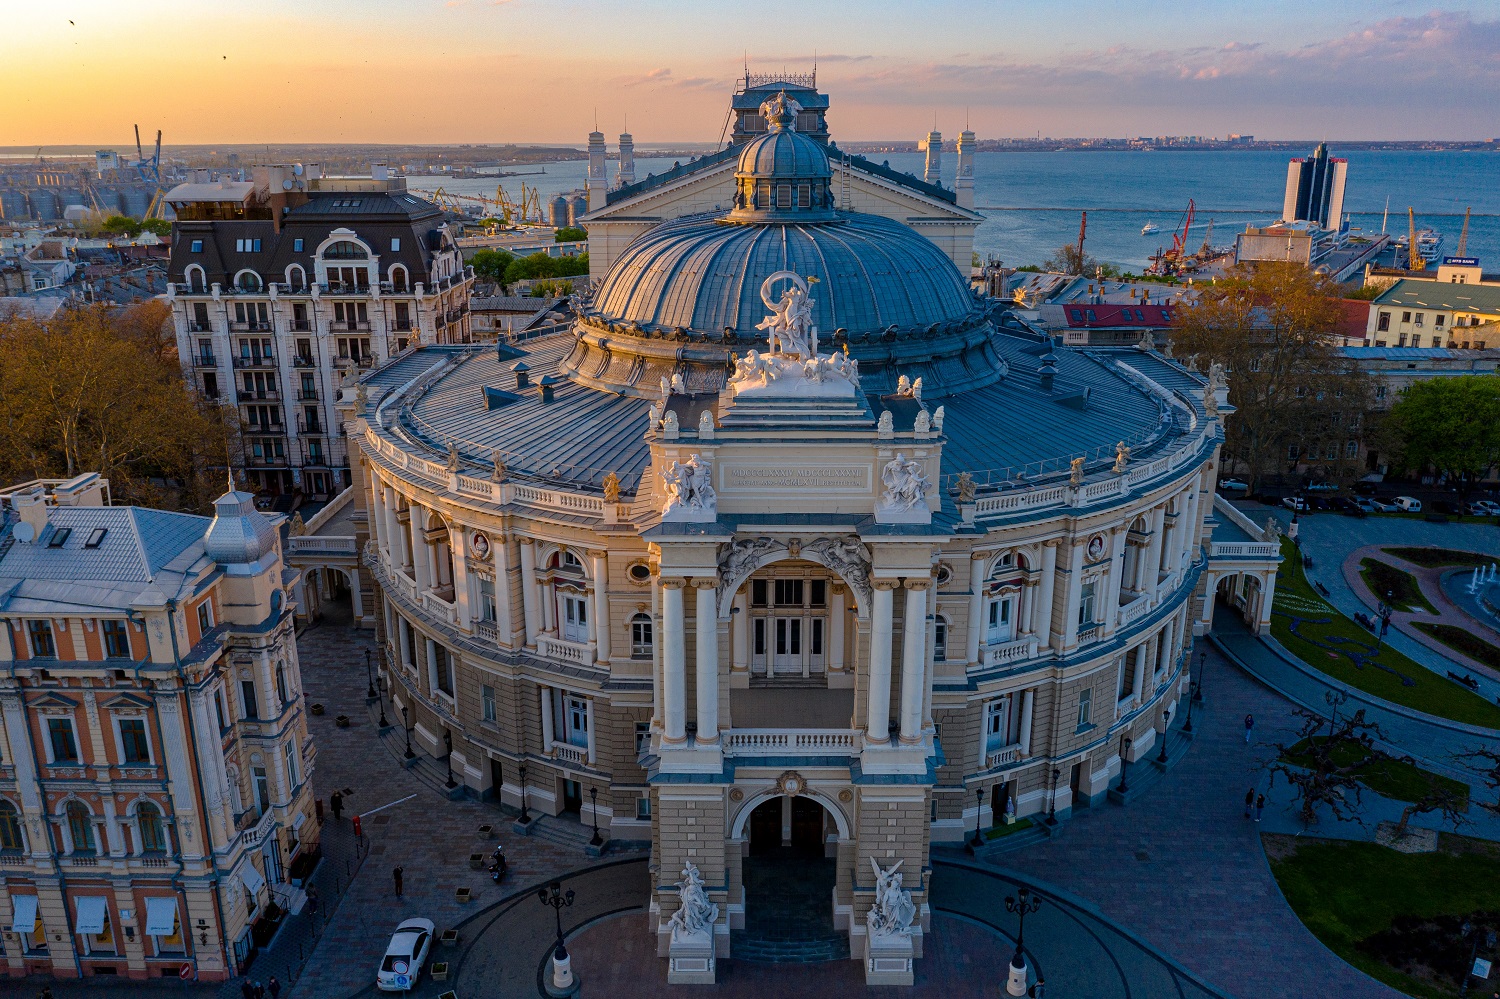 Municipalities of Odesa and Italy are establishing cooperation